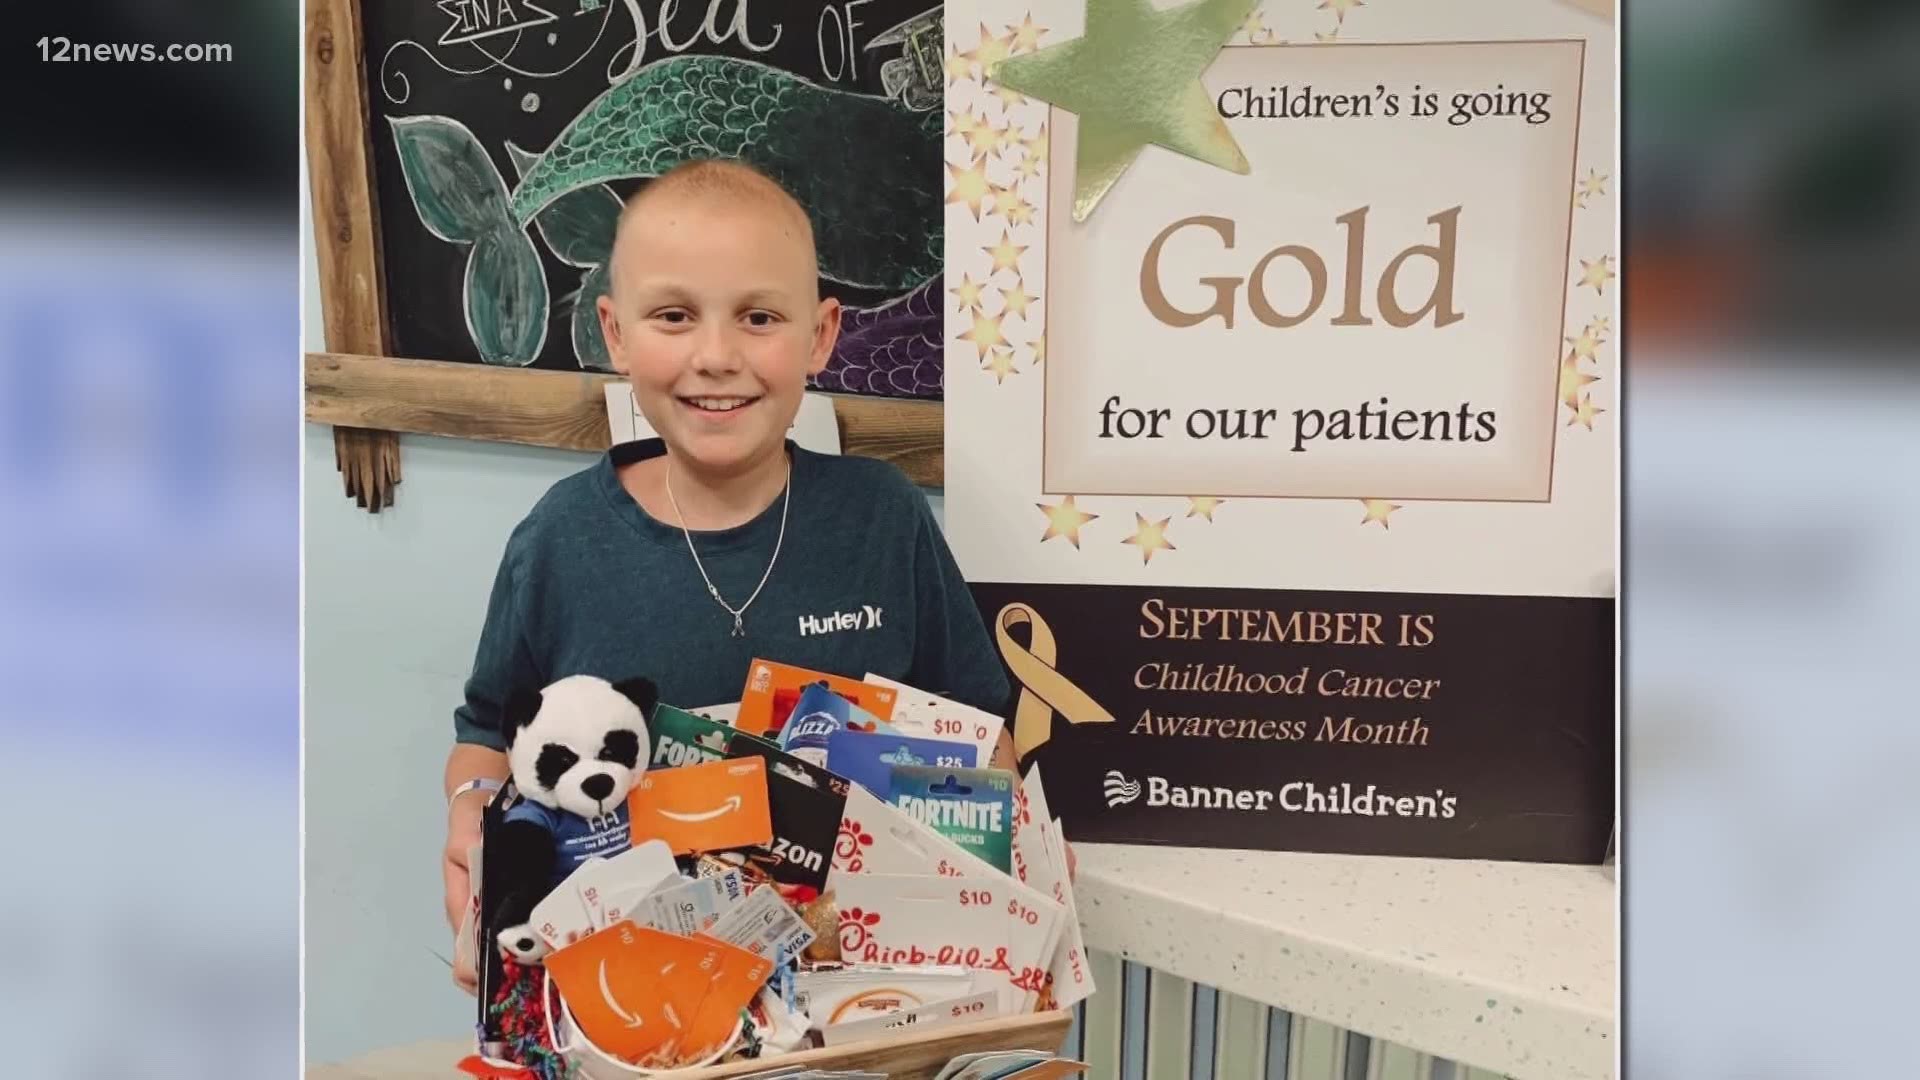 11-year-old cancer survivor Baydon Felix, with the help of MacDonald Orthodontics, has helped raise $4,000 to buy gifts for children.